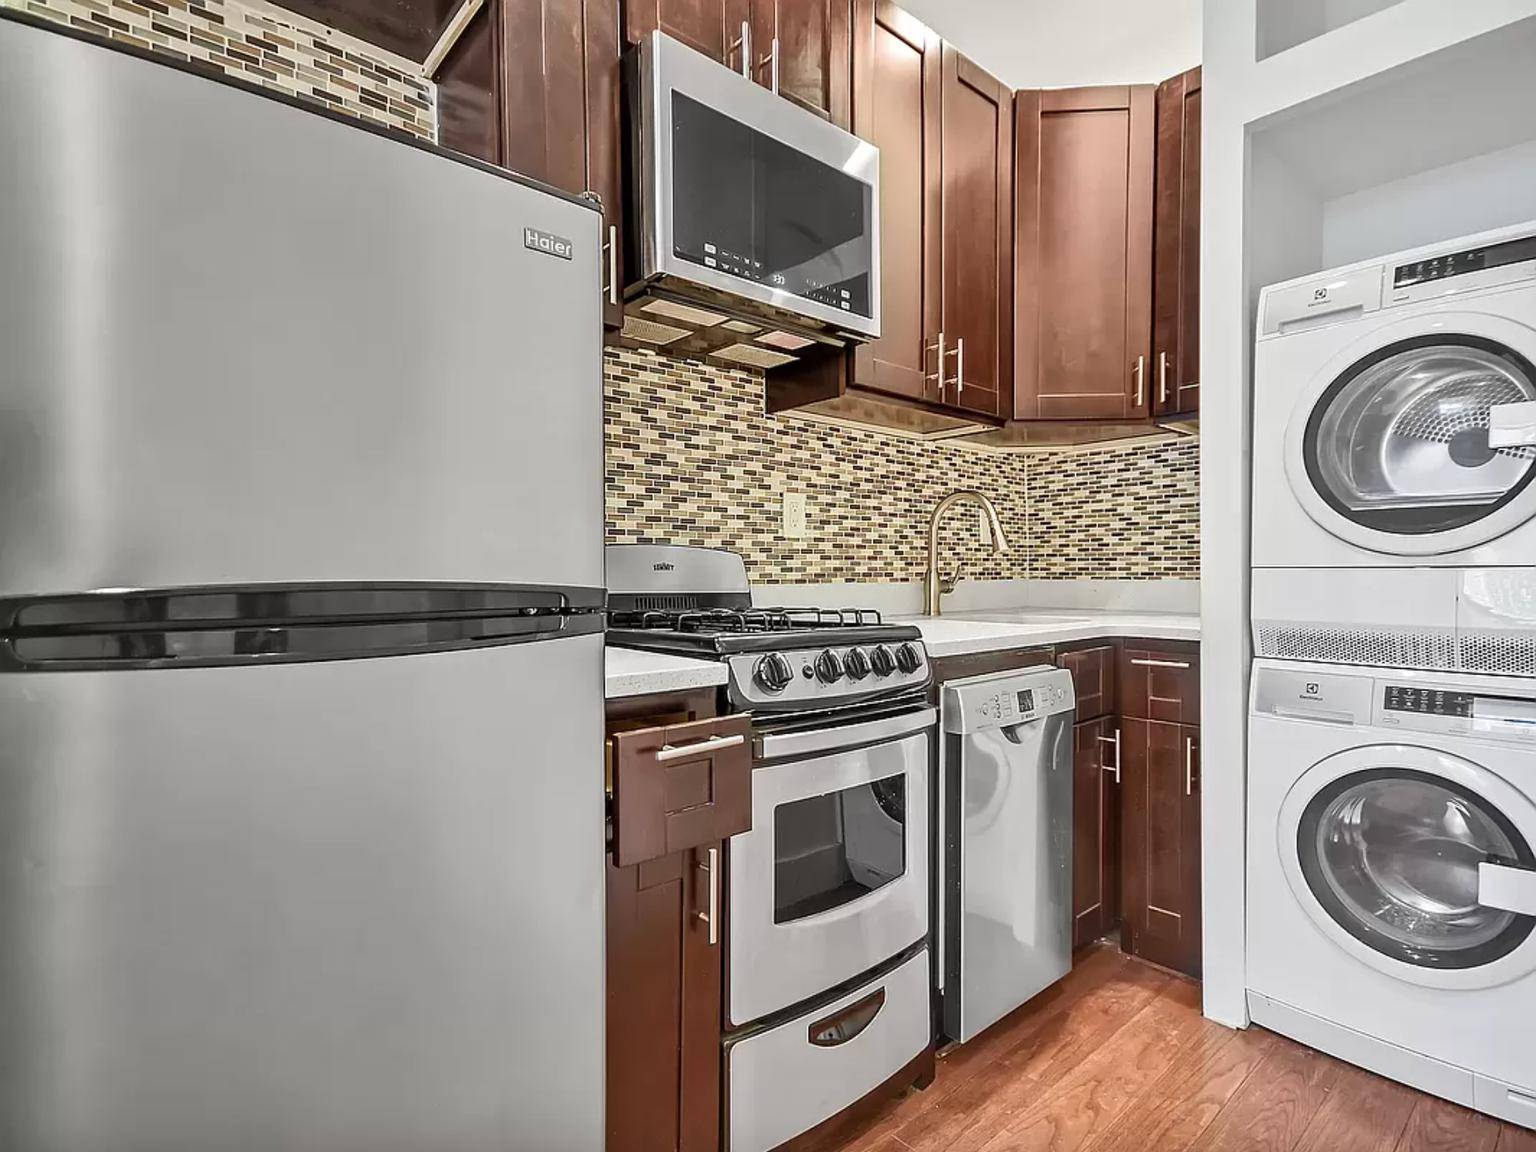 INQUIRE FOR VIDEOAVAILABLE STARTING JUNE 5Live in this beautiful fully renovated 2BR 1BR with a washer dryer in unit in a prime Murray Hill location !